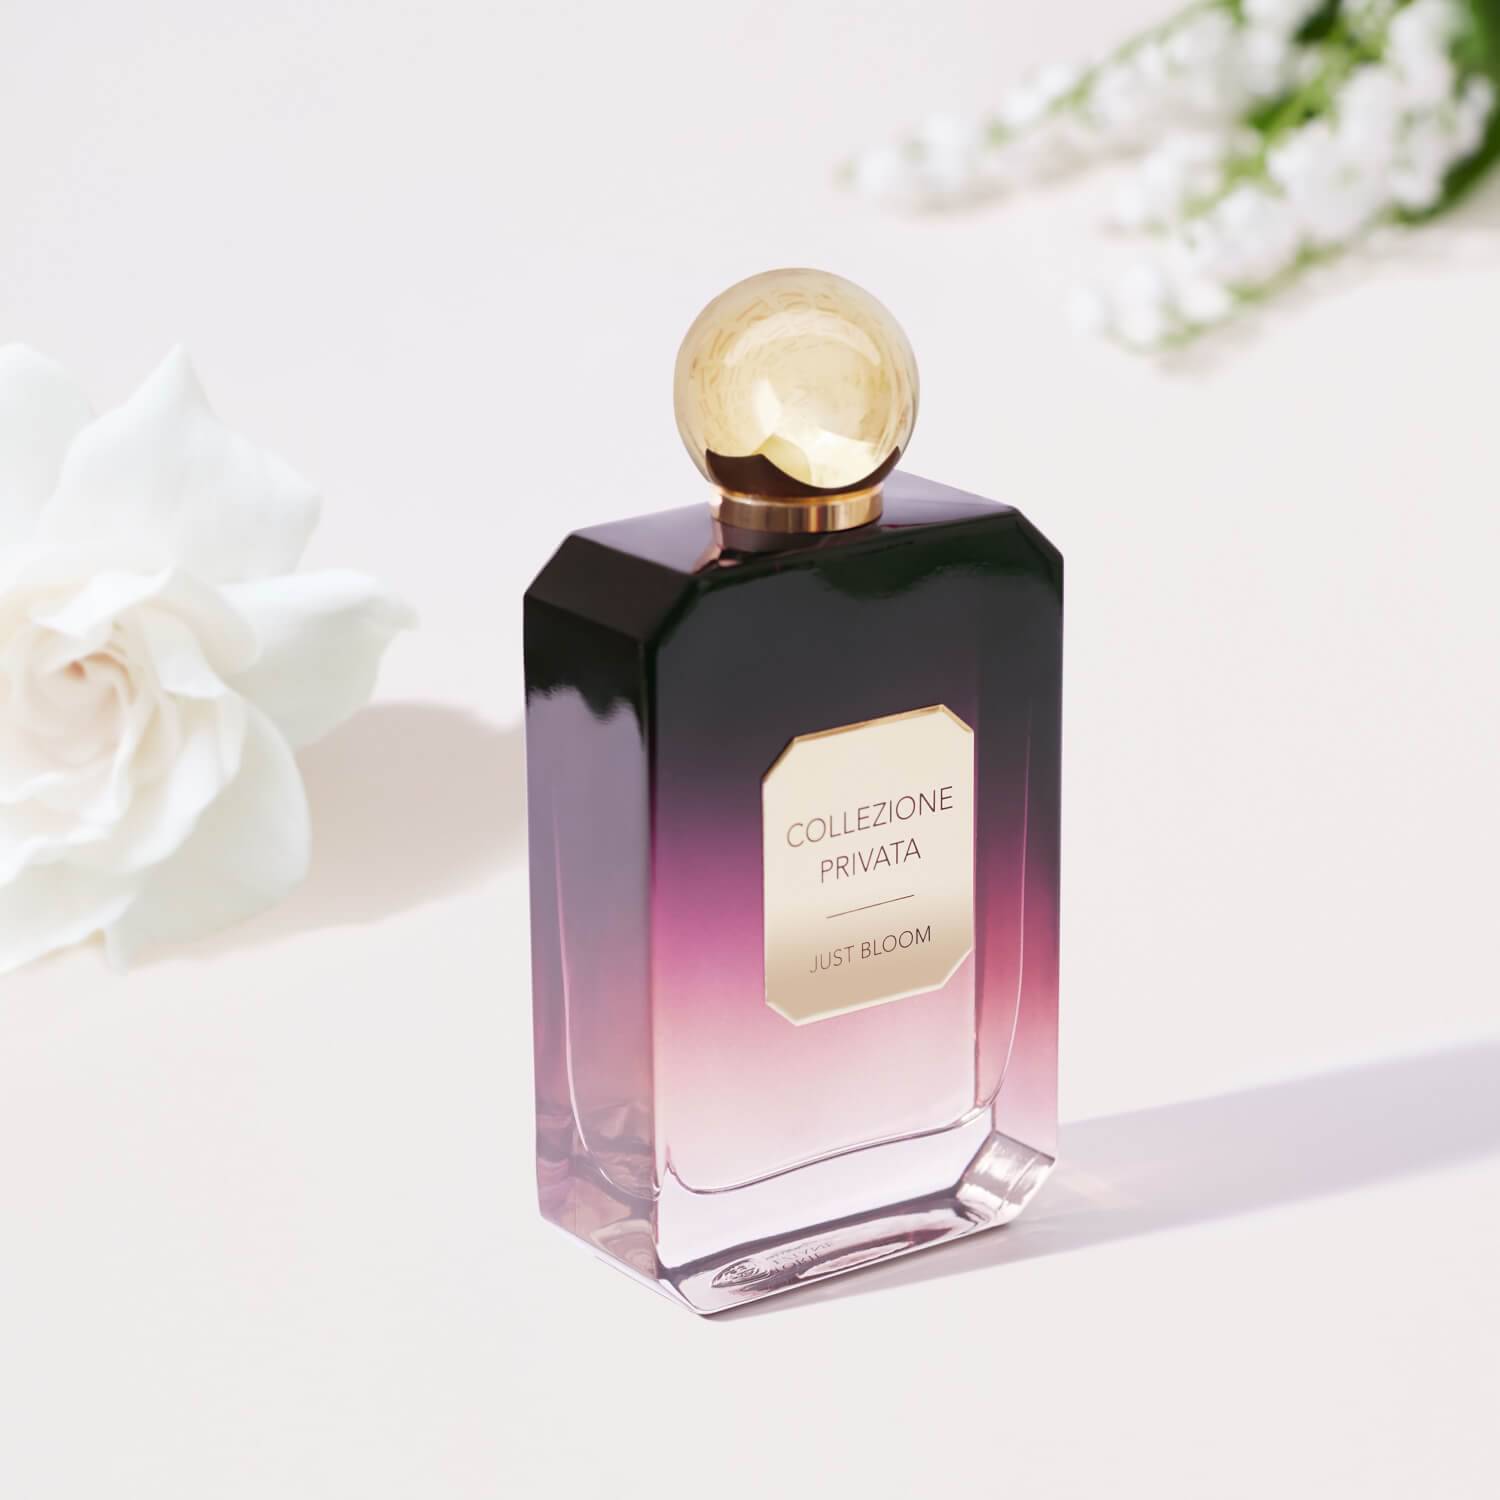 Buy STORIE VENEZIANE BY VALMONT Just Bloom at Scentbird